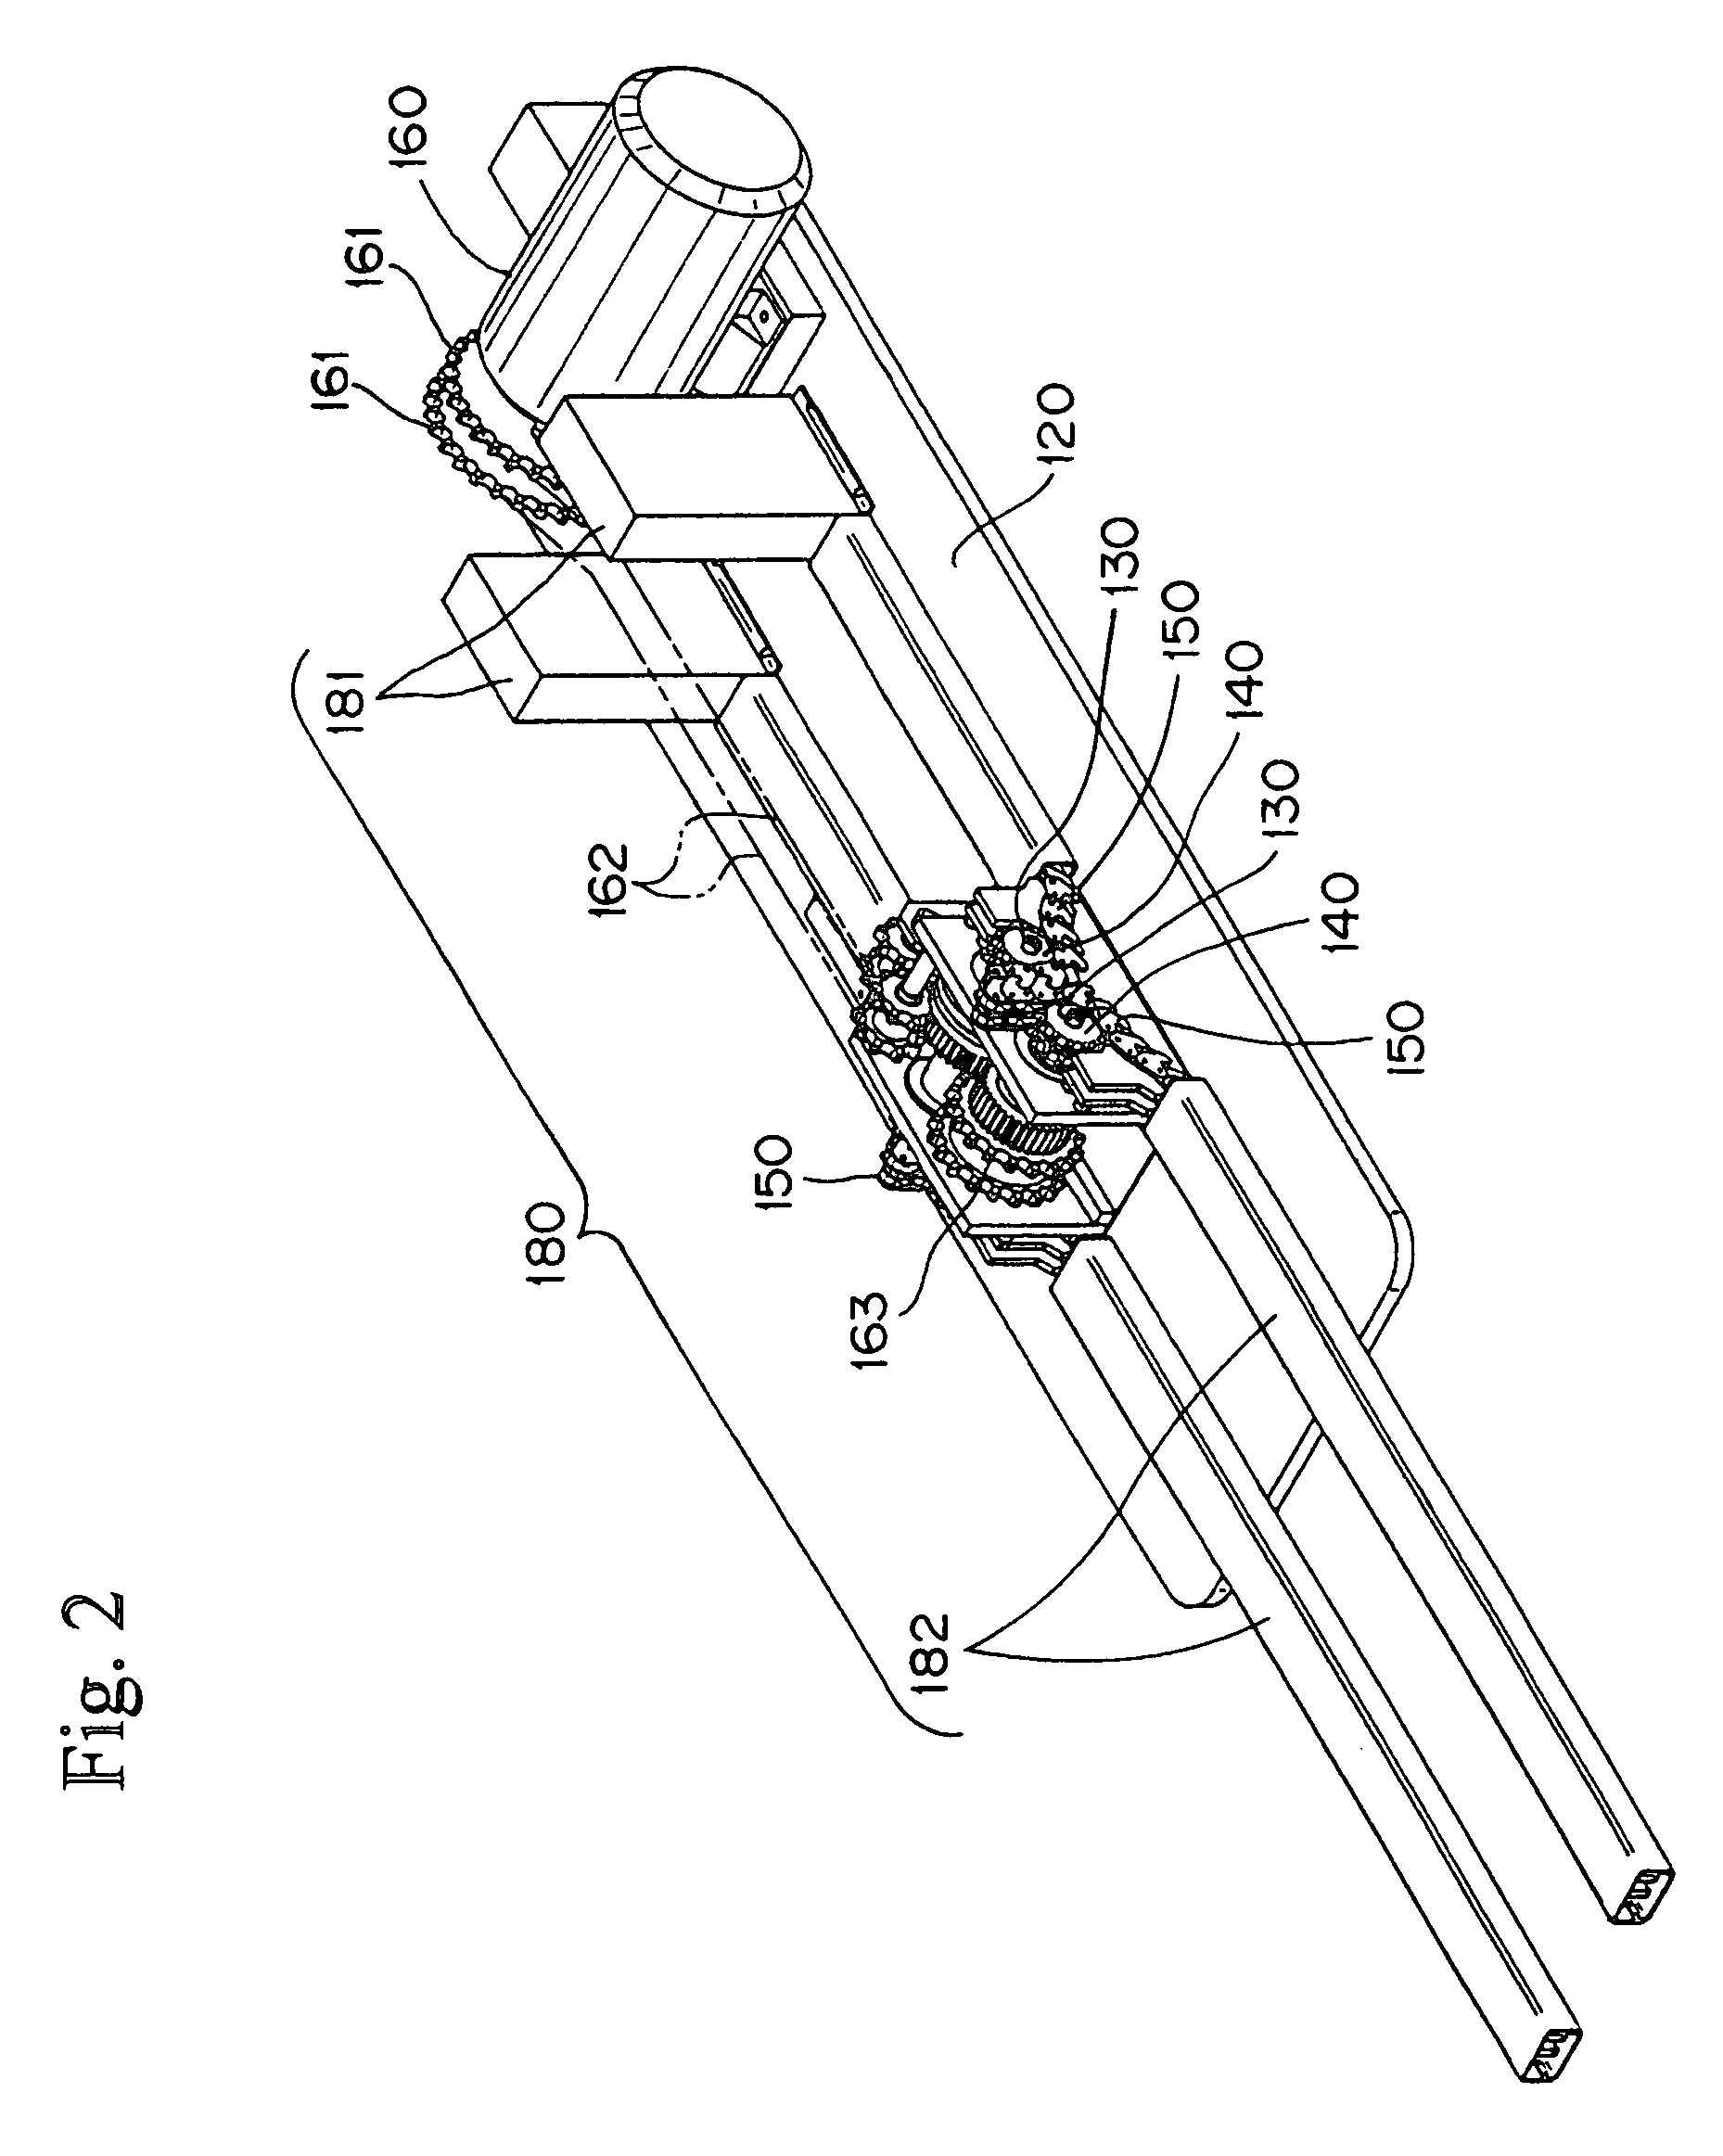 Hoisting and lowering device having engagement chains